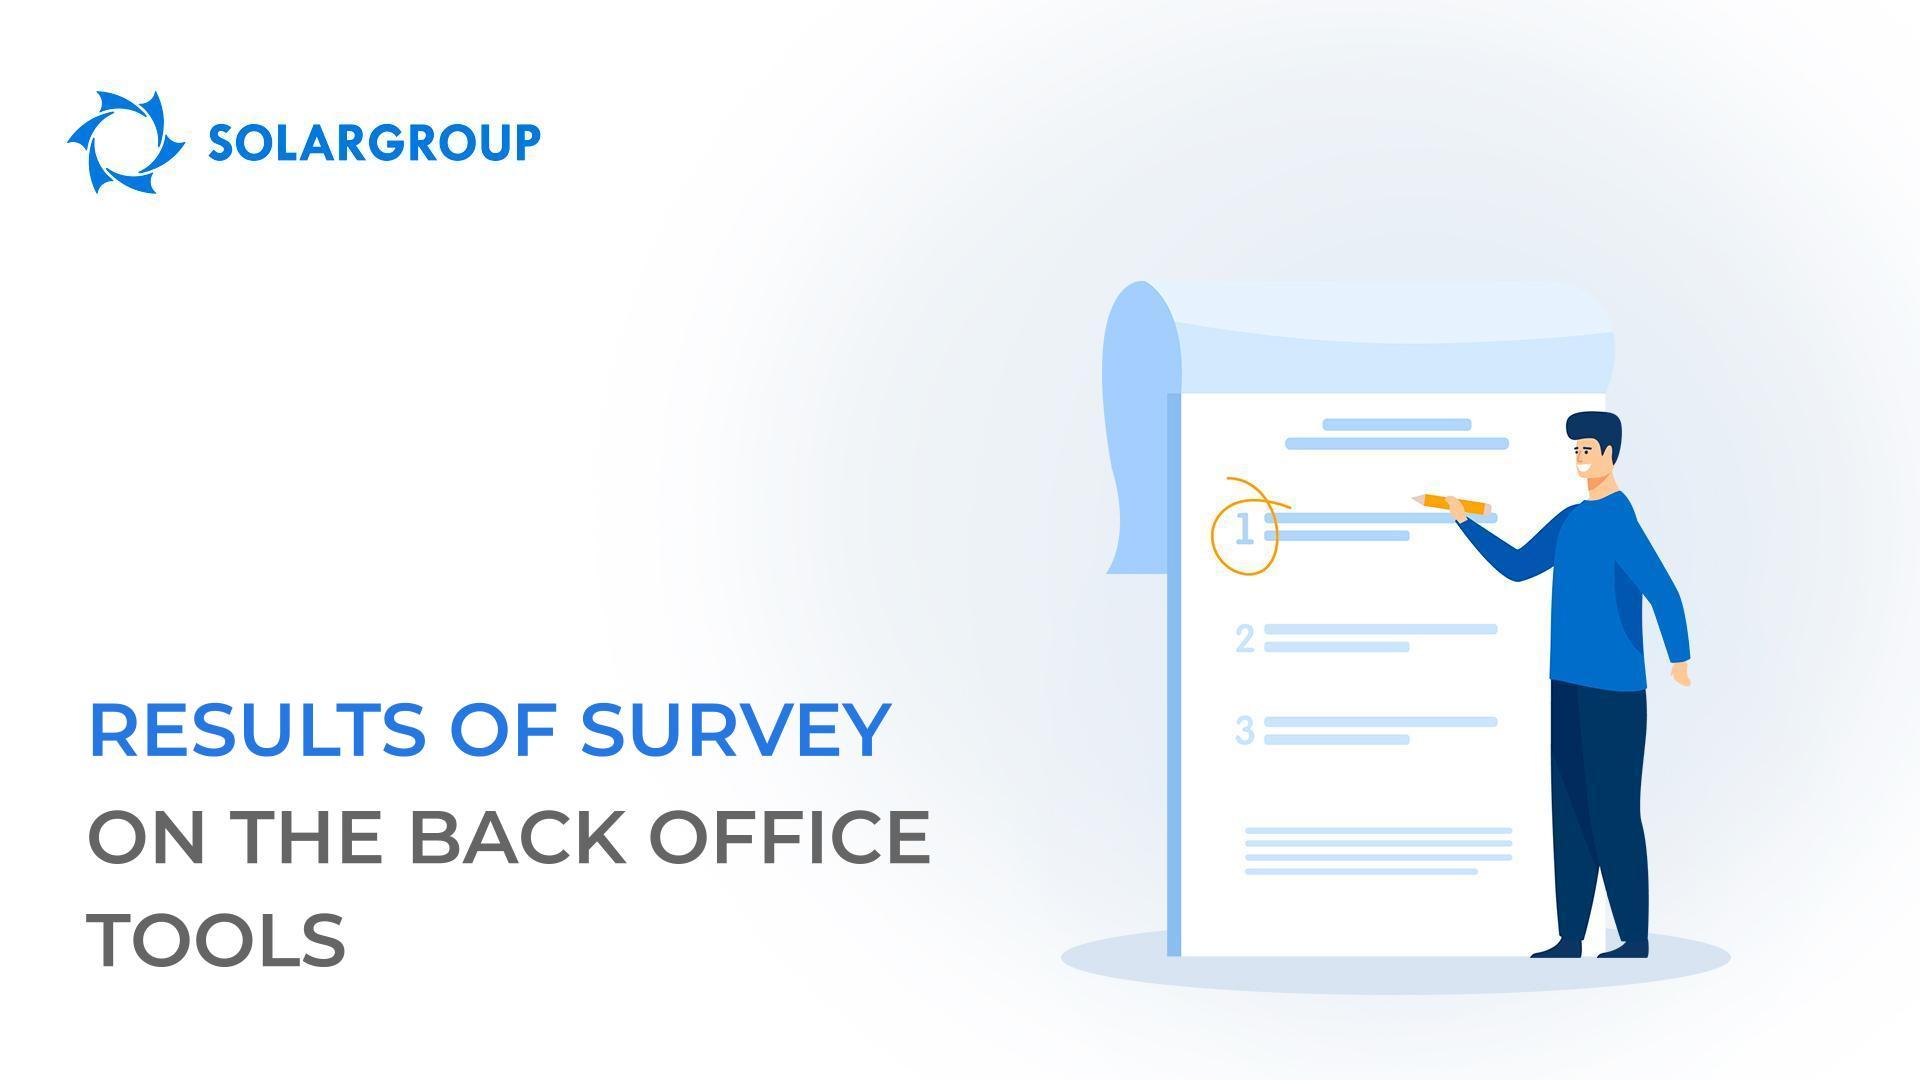 Results of the survey on the back office tools